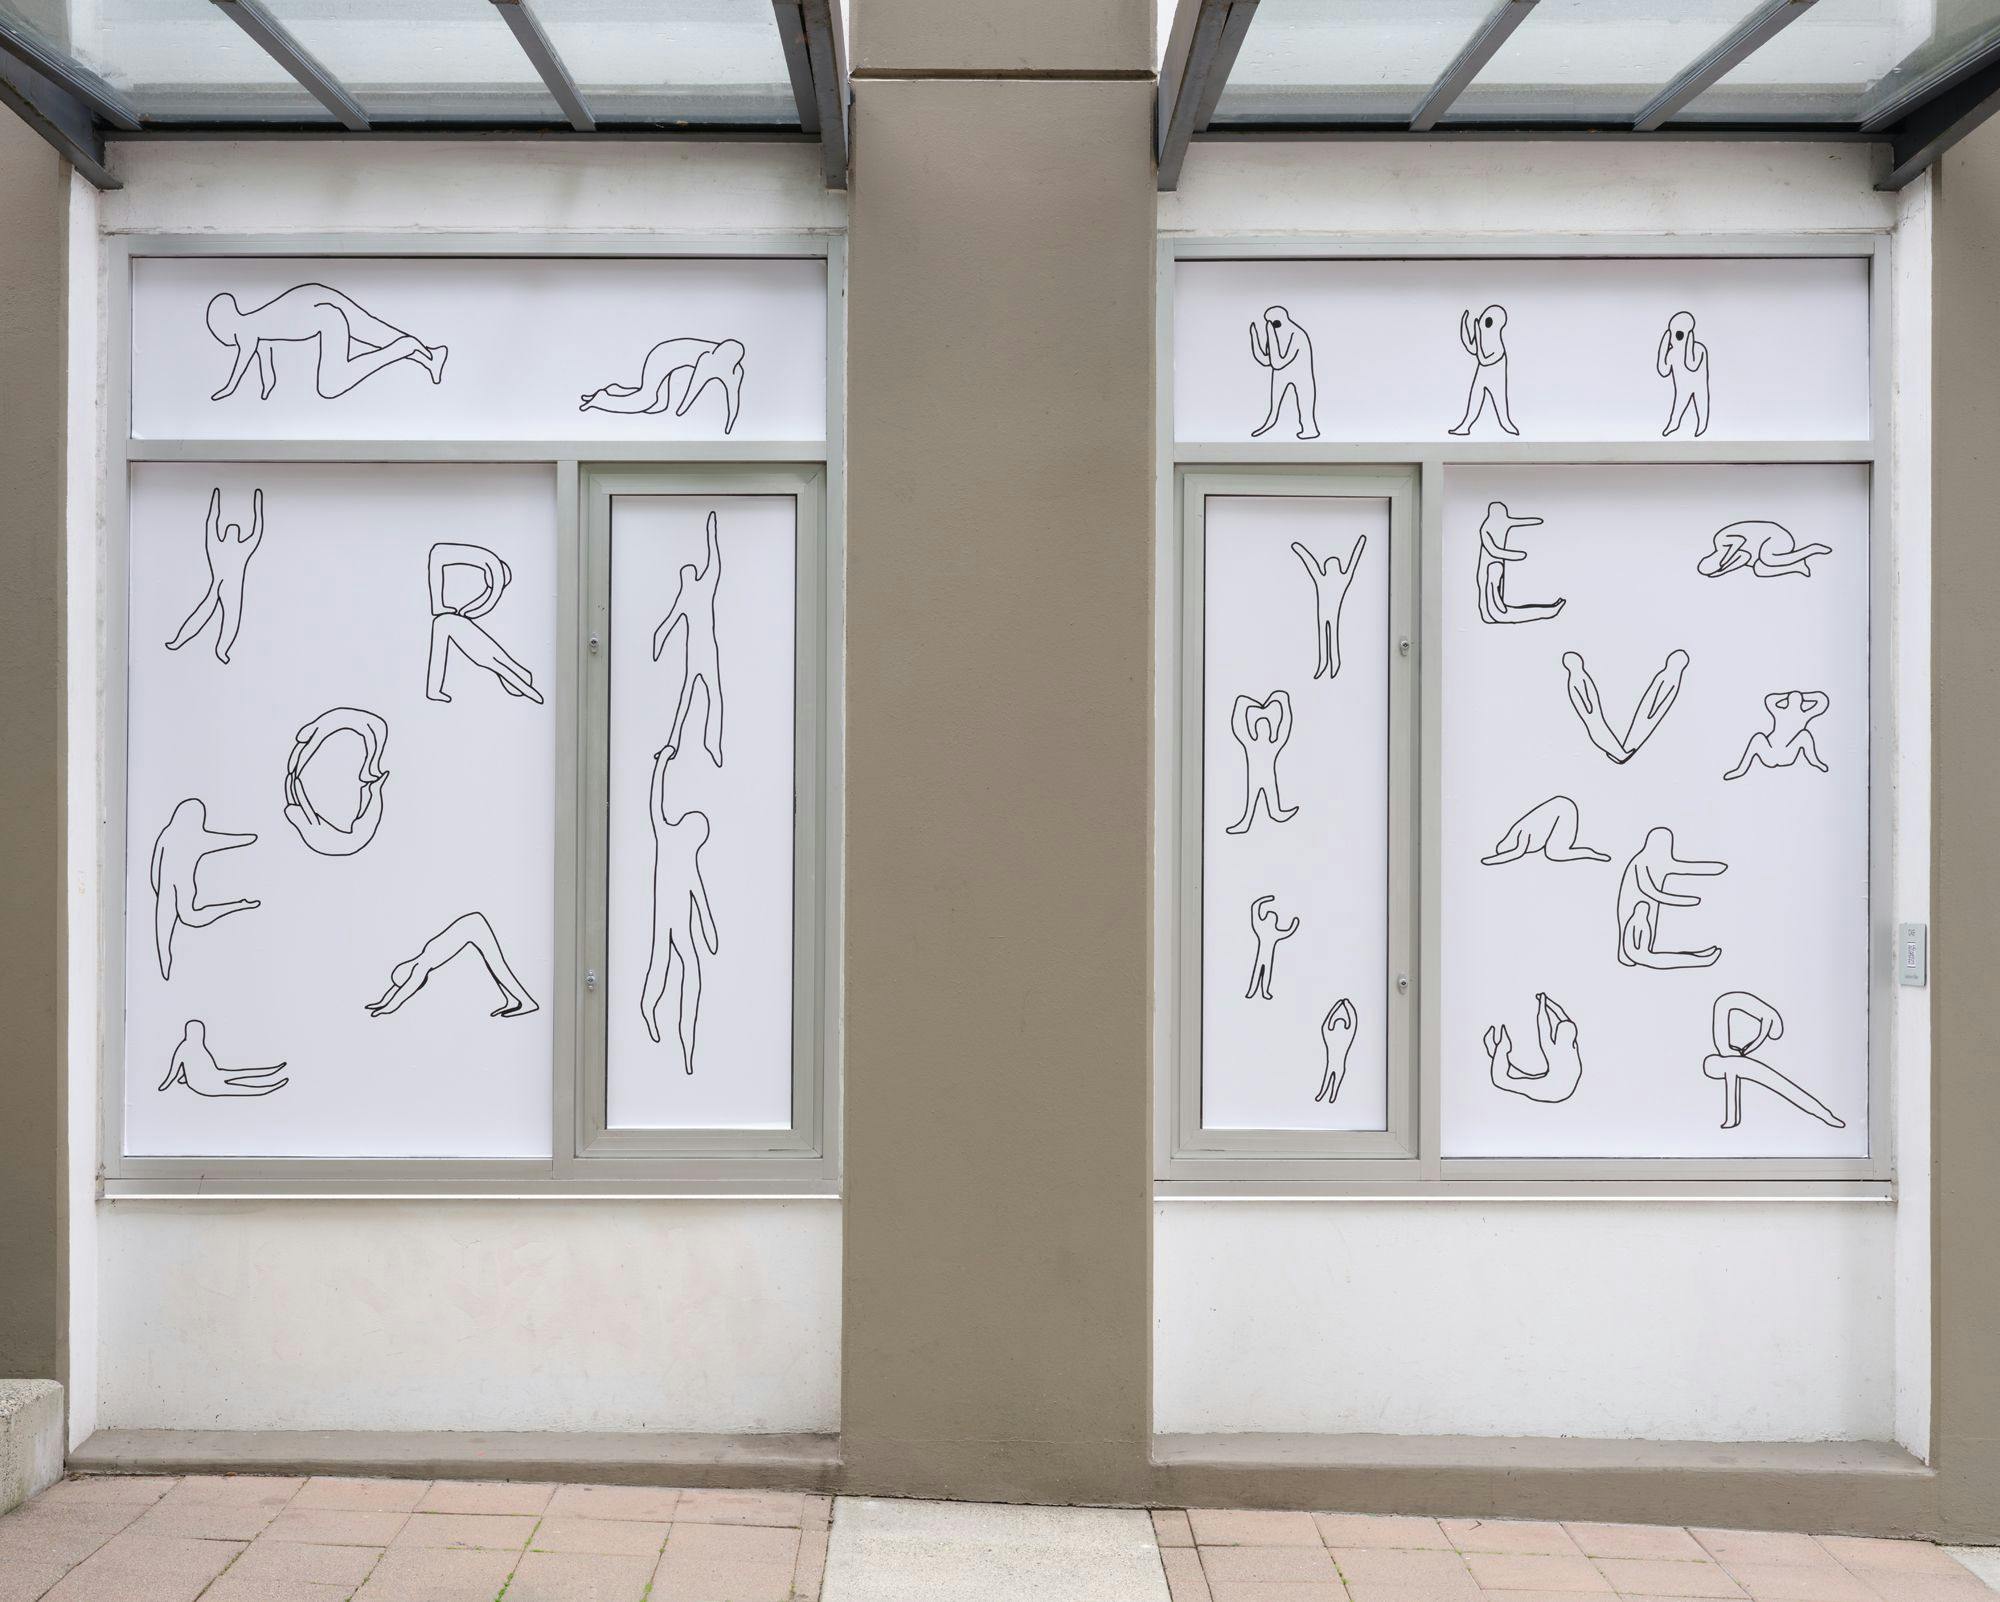 A pair of windows featuring line drawn figures engaged in various activities. Some of the figures spell out “for” and “ever” with their bodies.